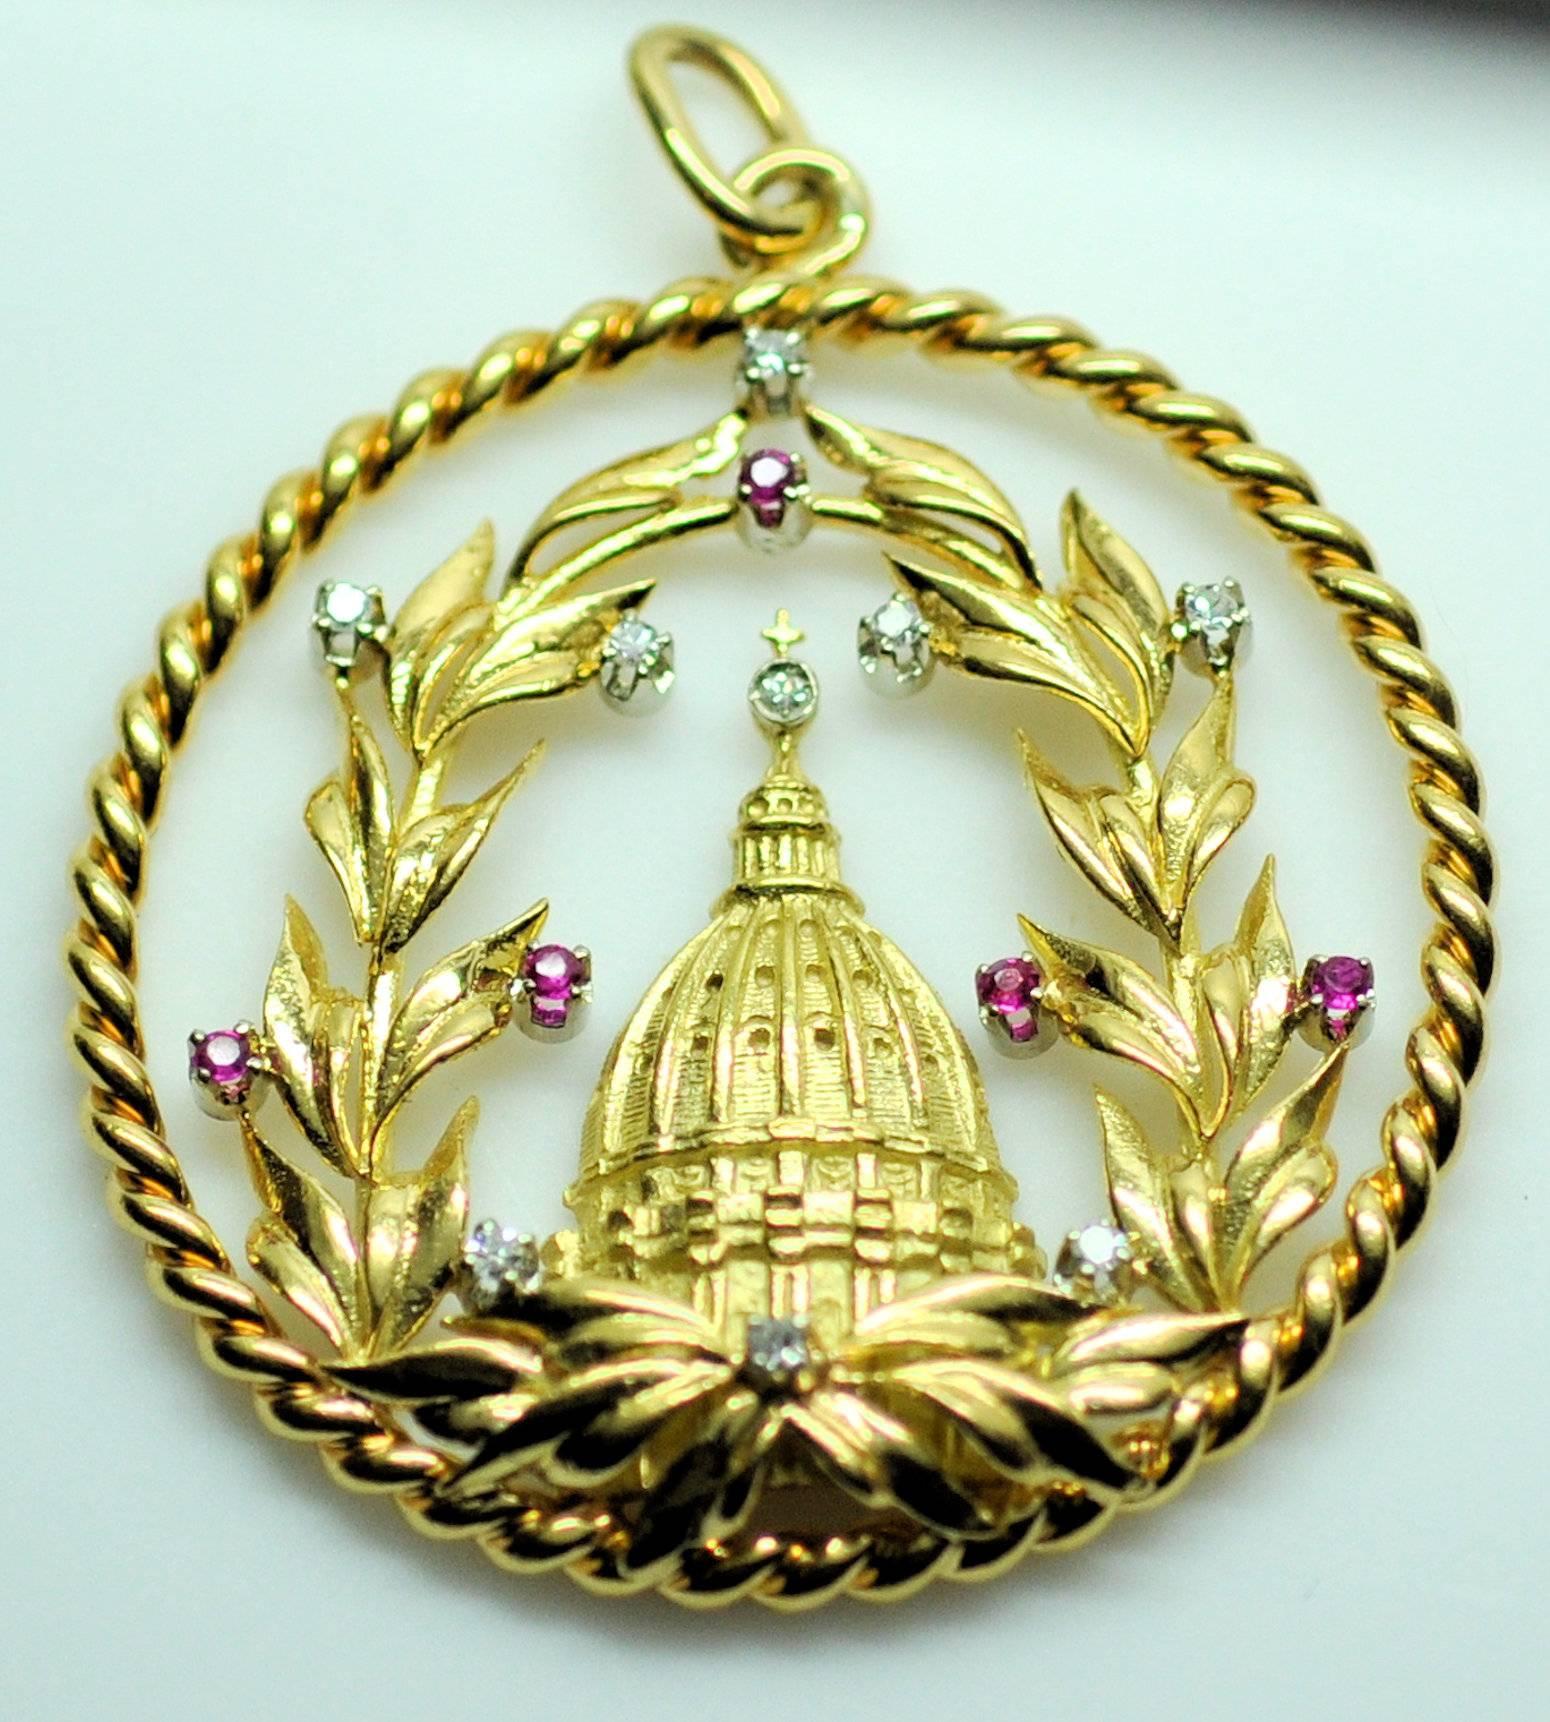 Vatican with laurel wreath. Fine workmanship and 18K yellow gold with white gold stone settings. Set with 9 round diamonds 0.09 ct. total weight and 5 round cut rubies 0.05 ct. total weight. Signed:  750